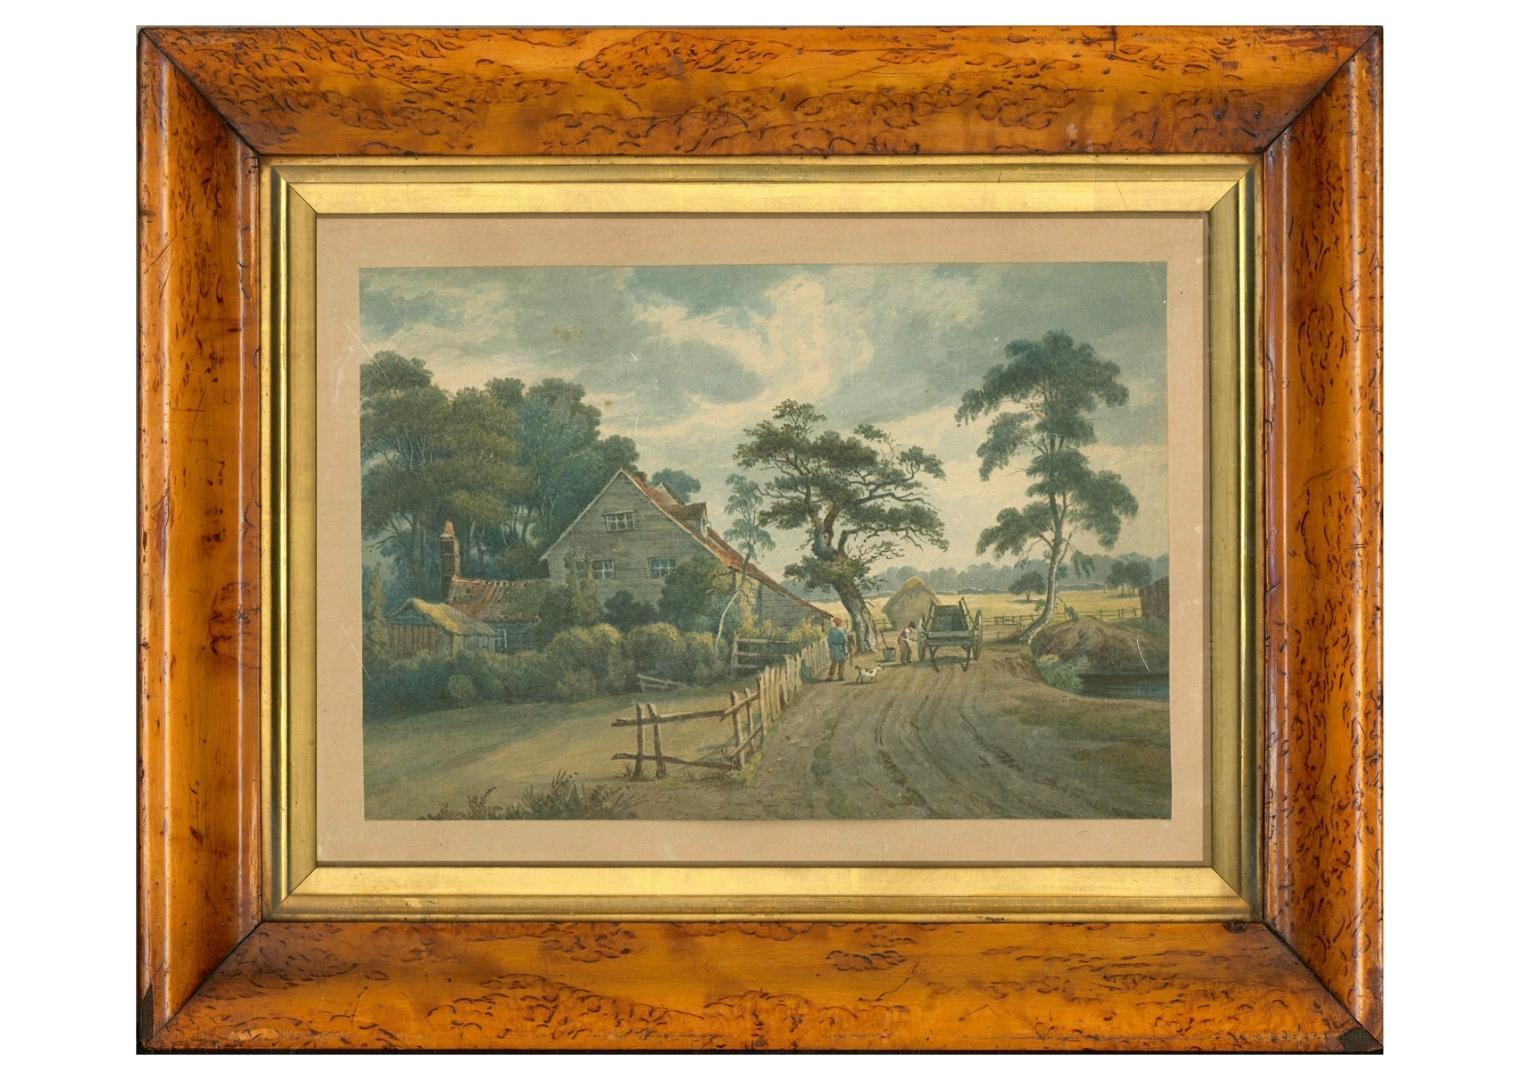 1834 Watercolour - At Kilburn, Middlesex - Black Landscape Art by Unknown